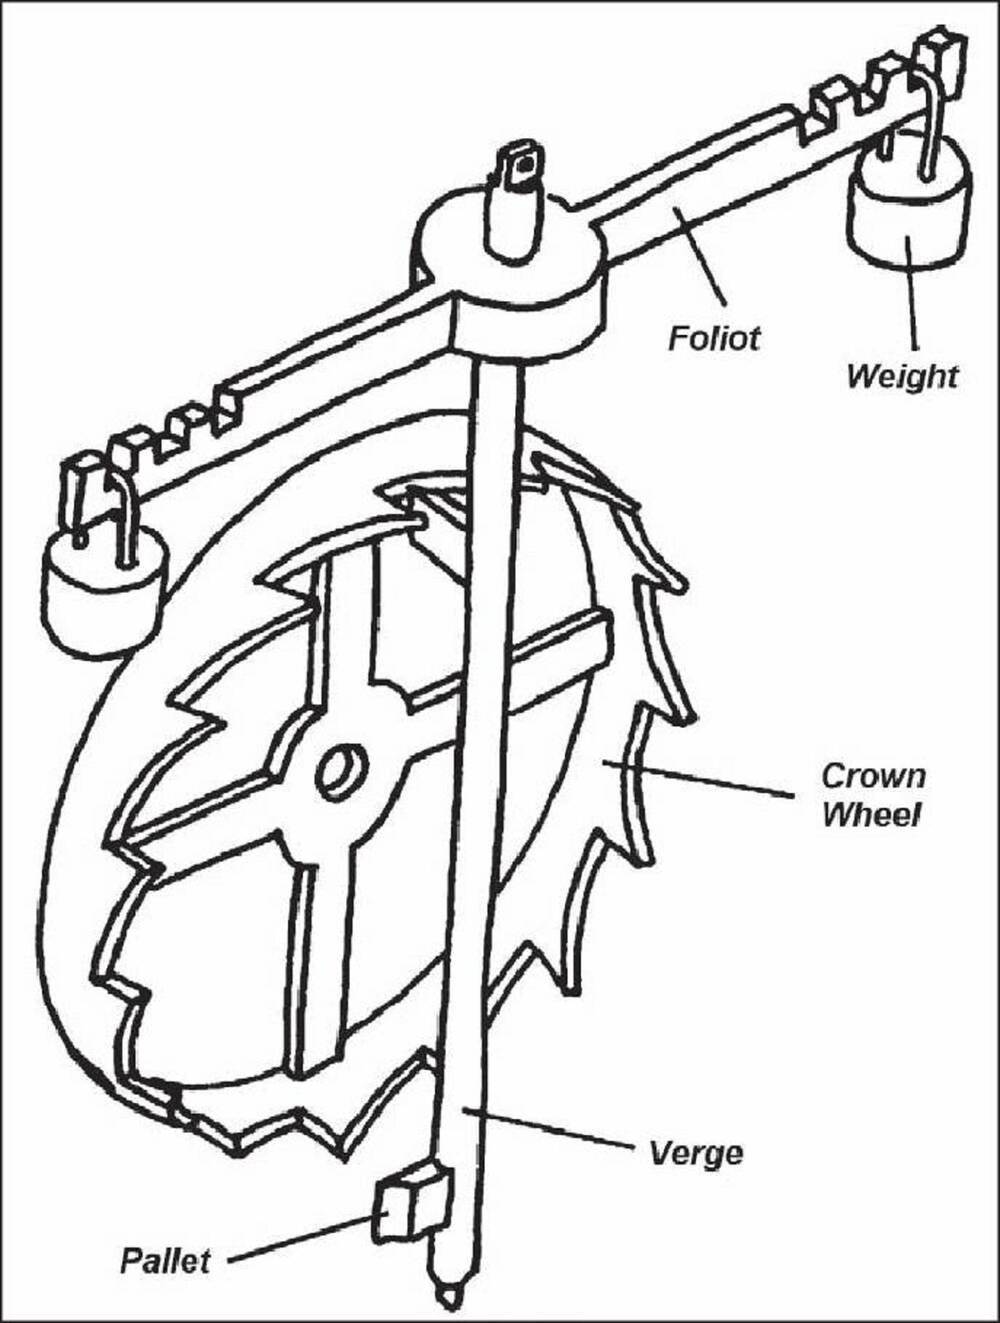 A line illustration diagram, with labels, that shows how a verge escapement works in a clock. It shows a structure with a weight balanced either side and a cogged wheel in the middle.